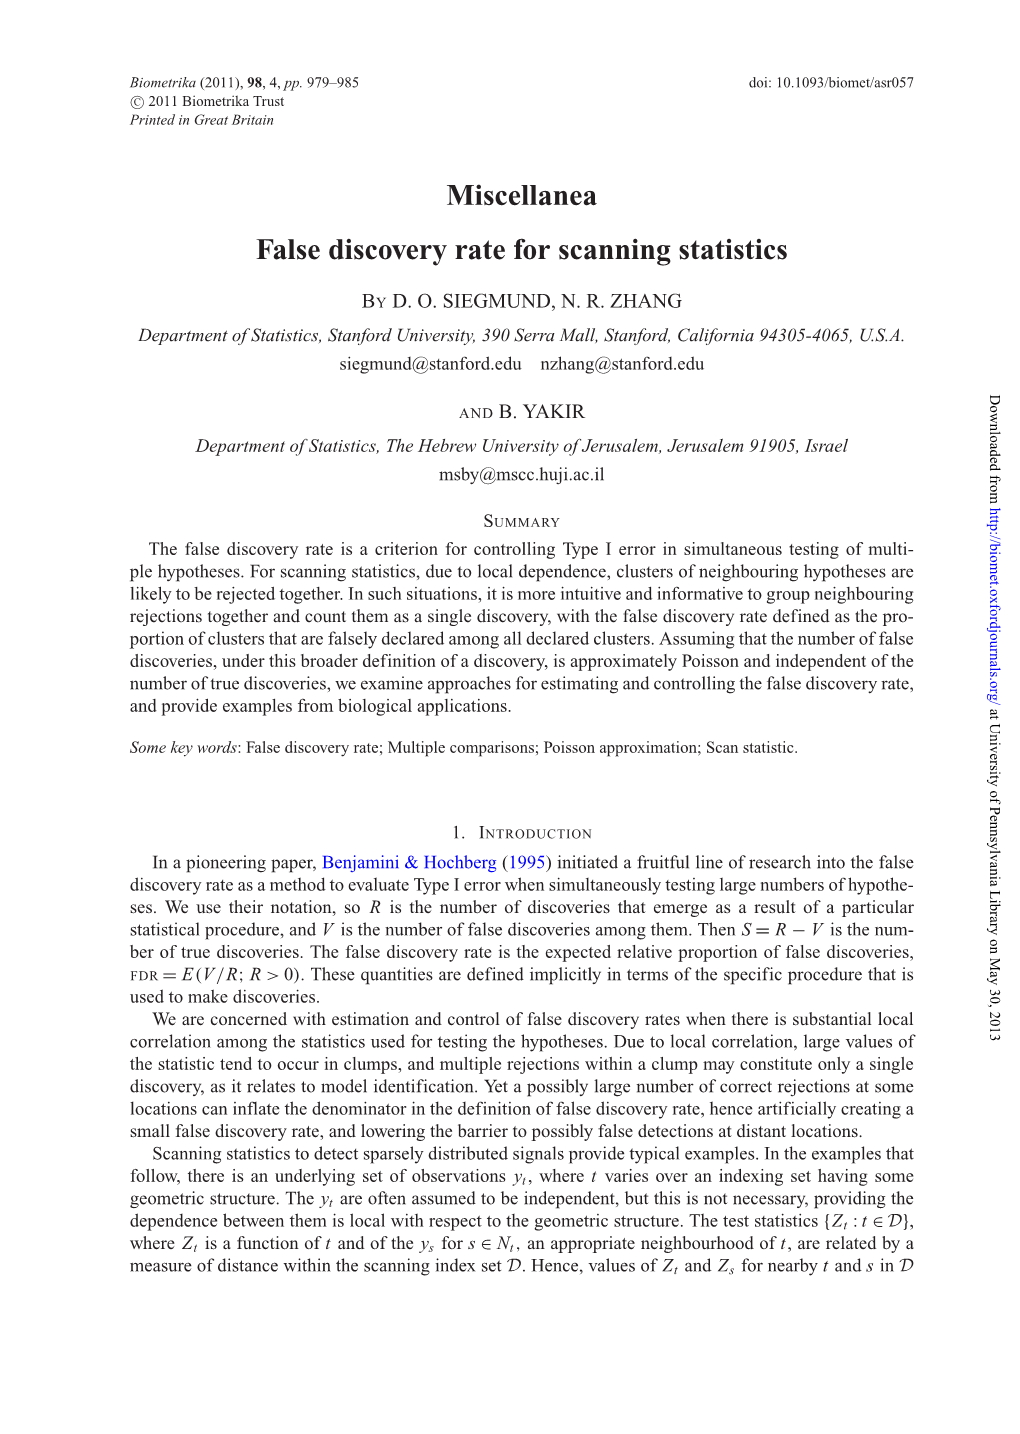 Miscellanea False Discovery Rate for Scanning Statistics